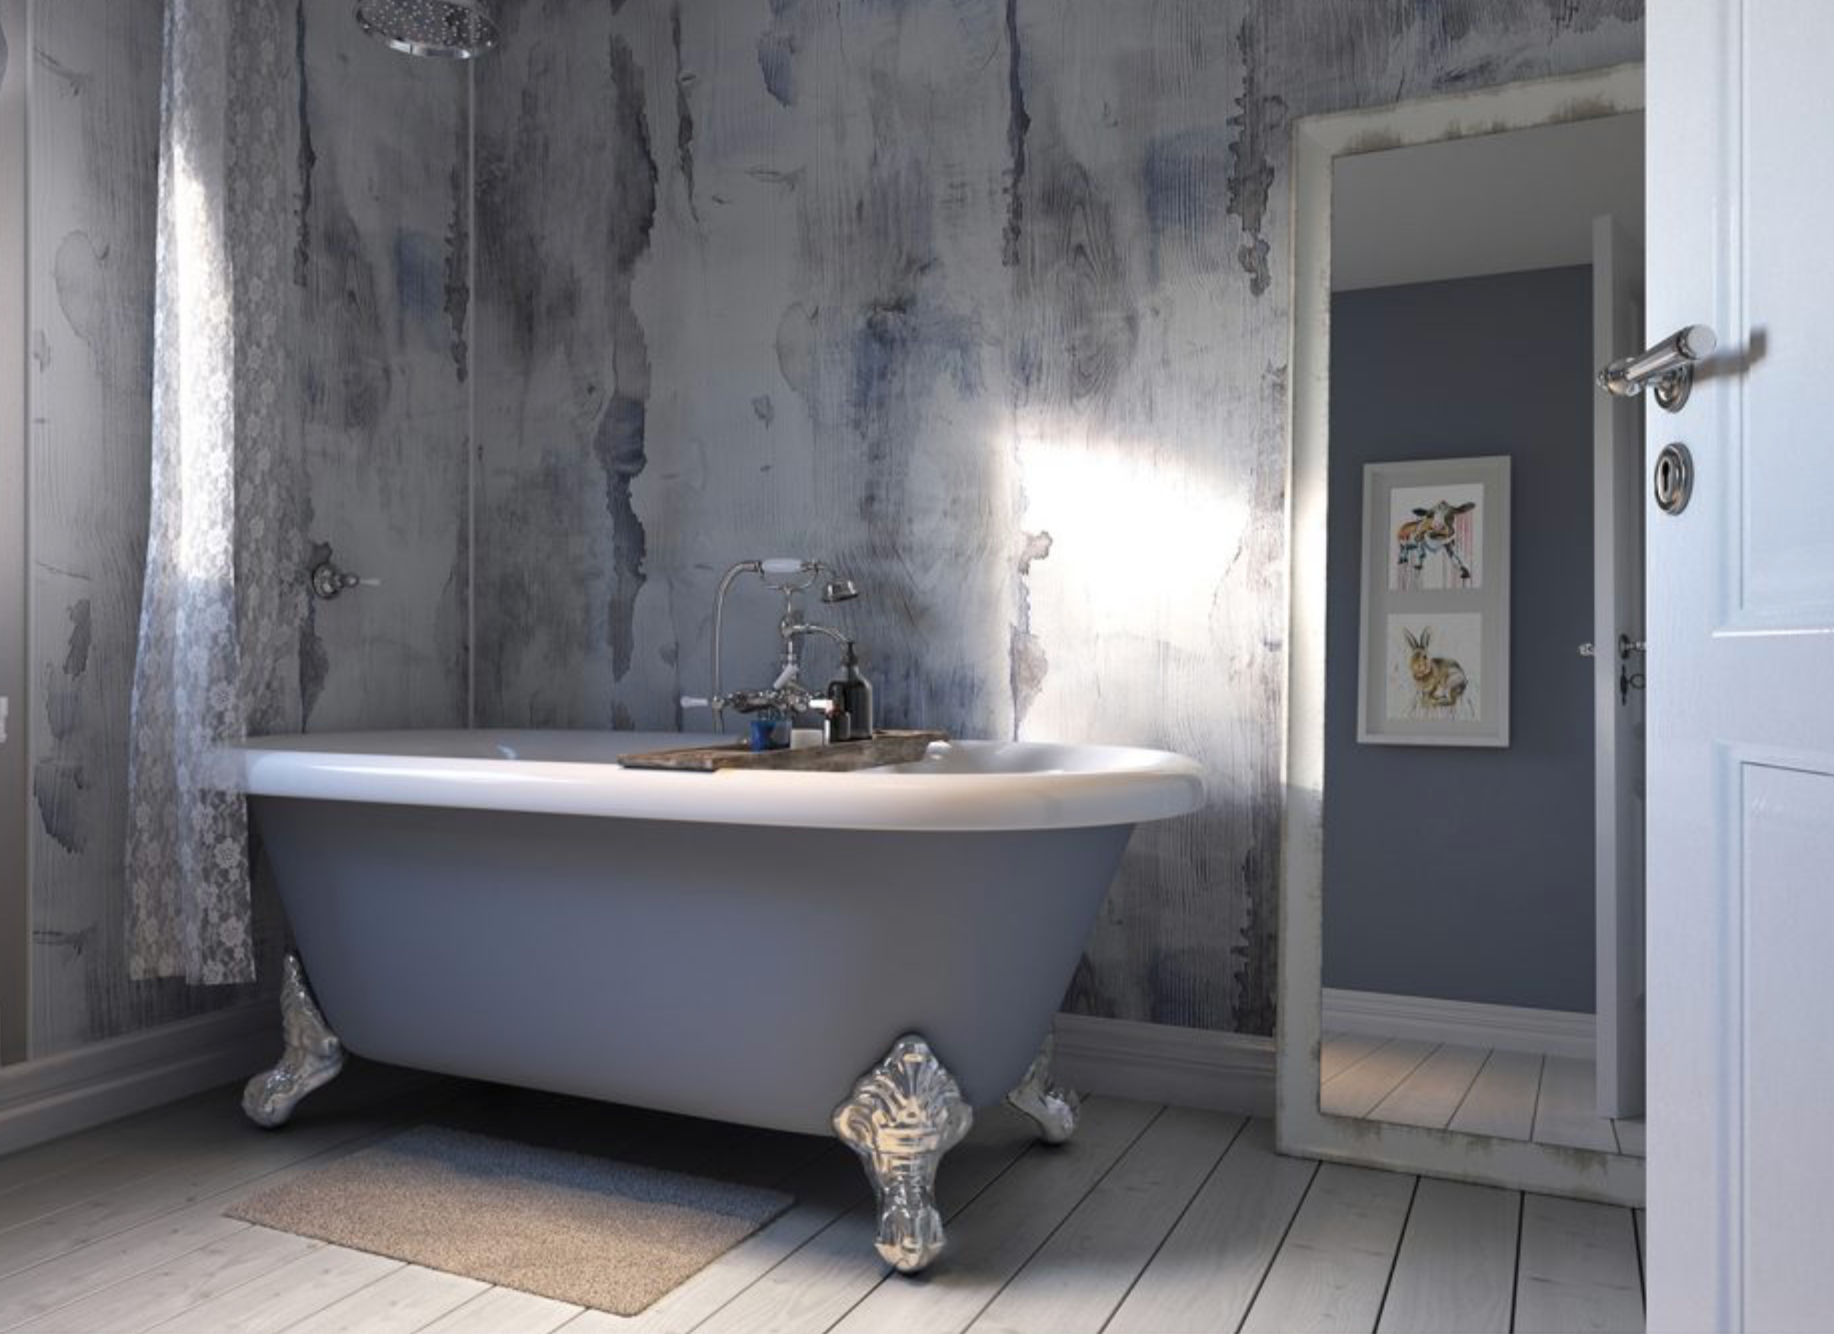 Showerwall Laminate Quarry Collection - Nautical Wood